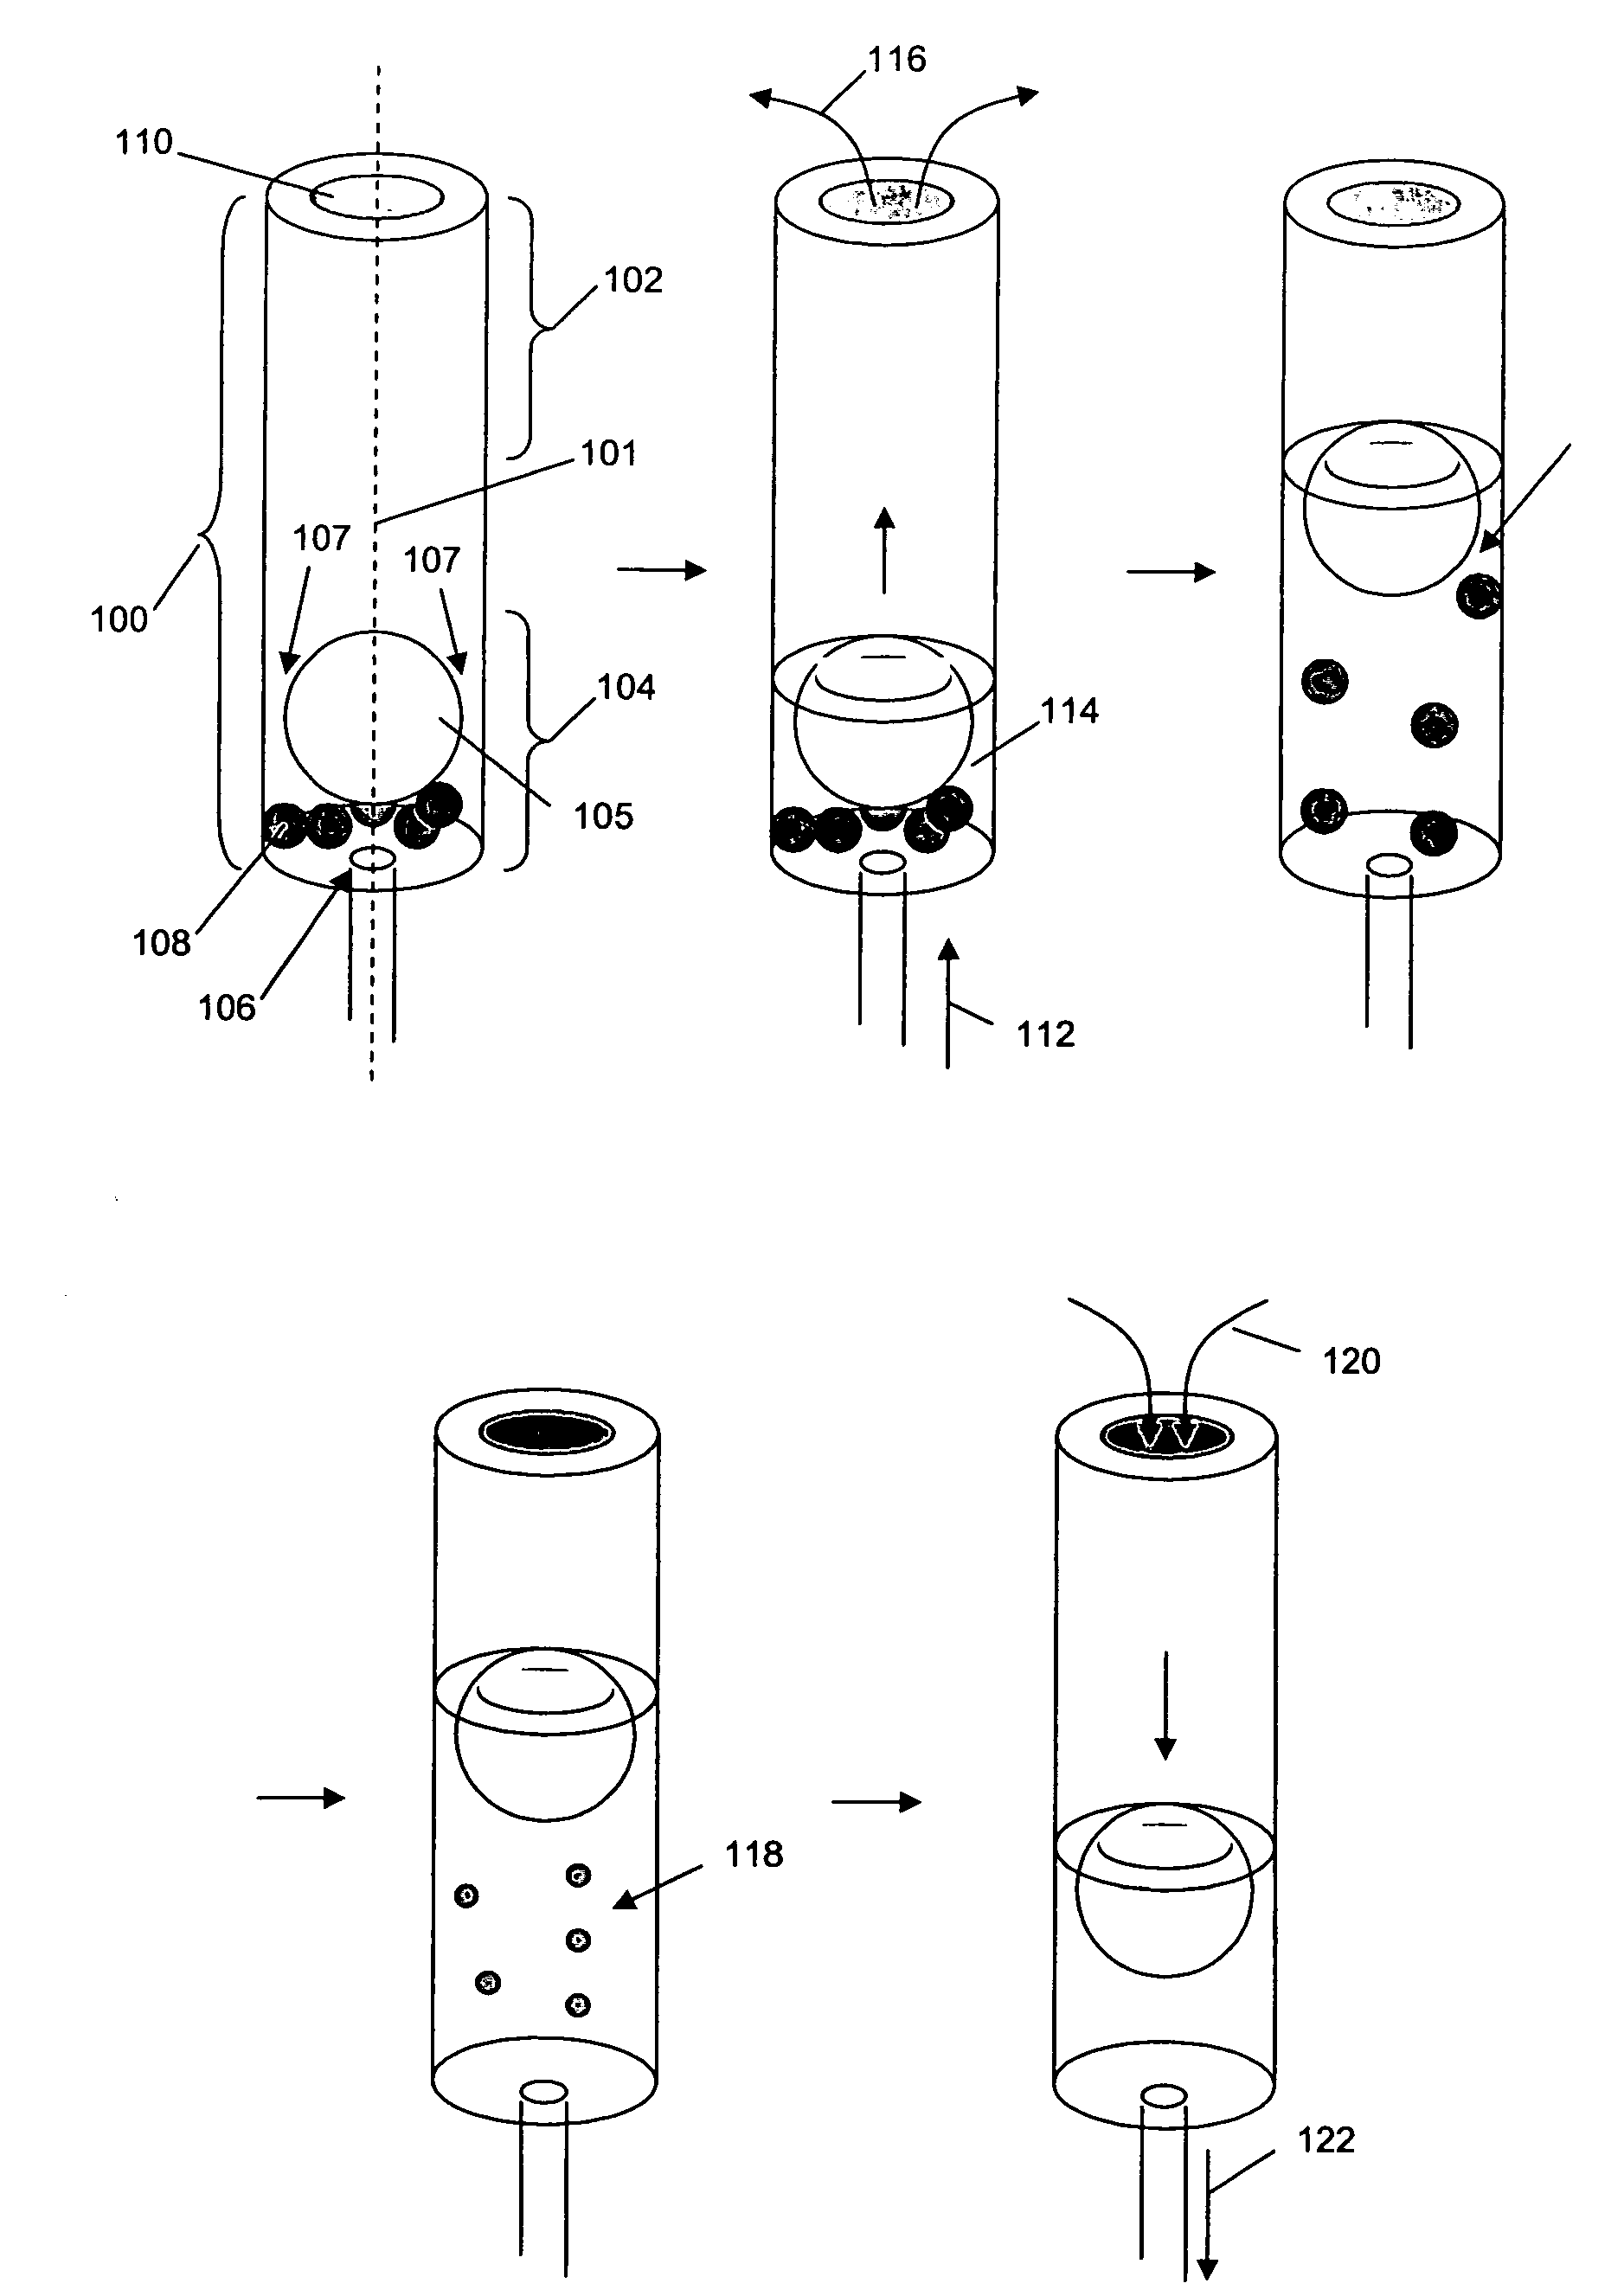 Reagent reservoir system for analytical instruments